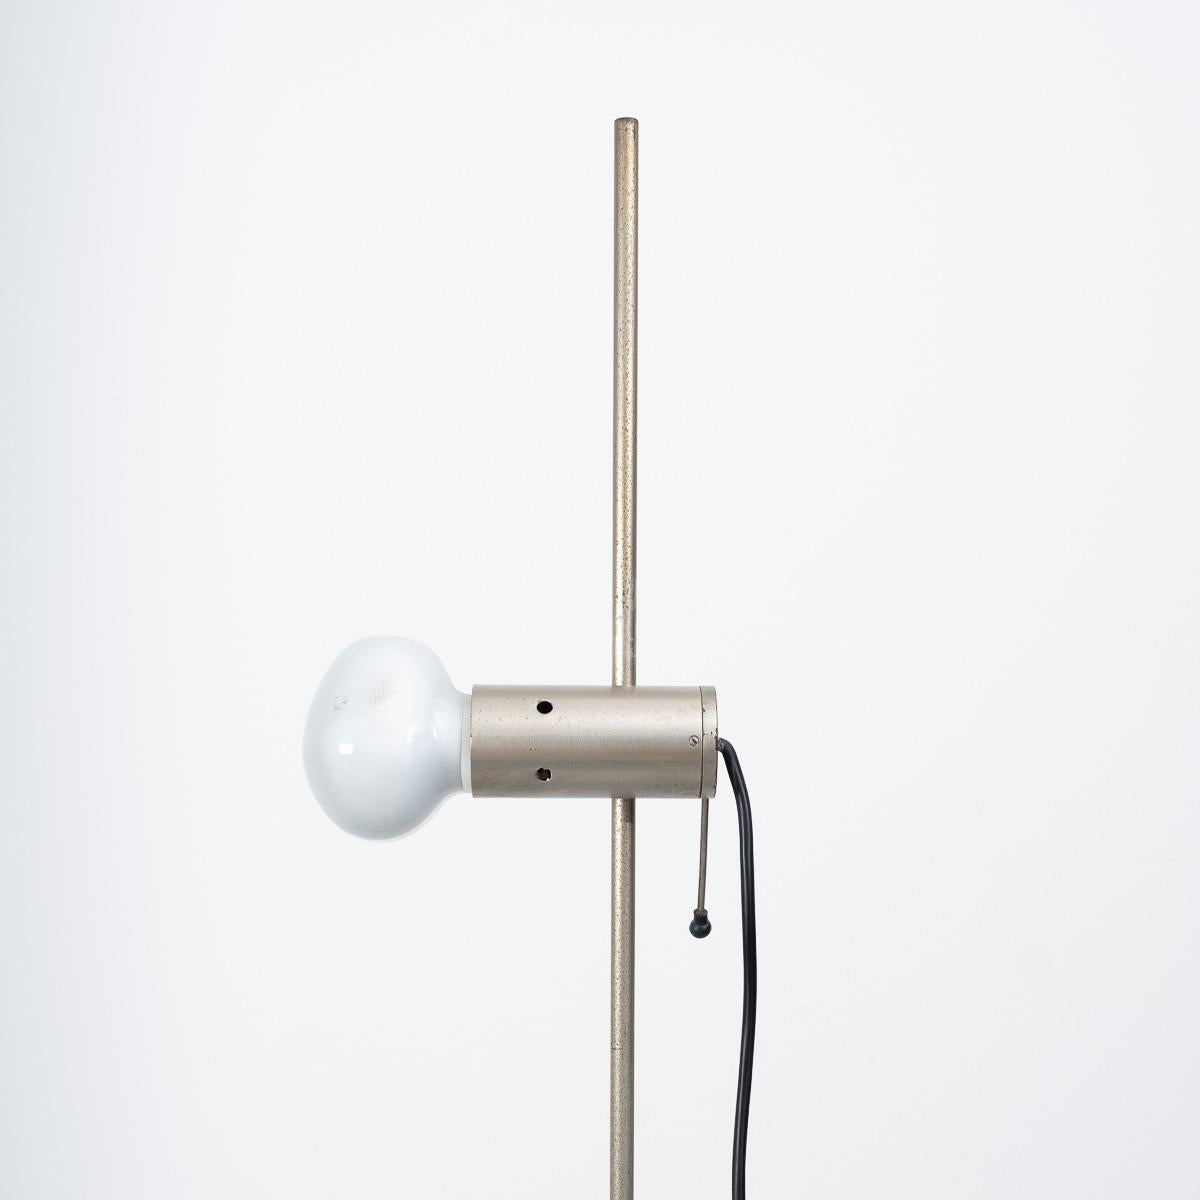 Model 387 floor lamp by Tito Agnoli for Oluce, Italy, 1954. Early edition, featuring a nickel-plated steel pole with original Cornalux ‘hammerhead’ light bulb on a travertine base. Pair available.

Patina of age. Original bulbs. Rewired and PAT